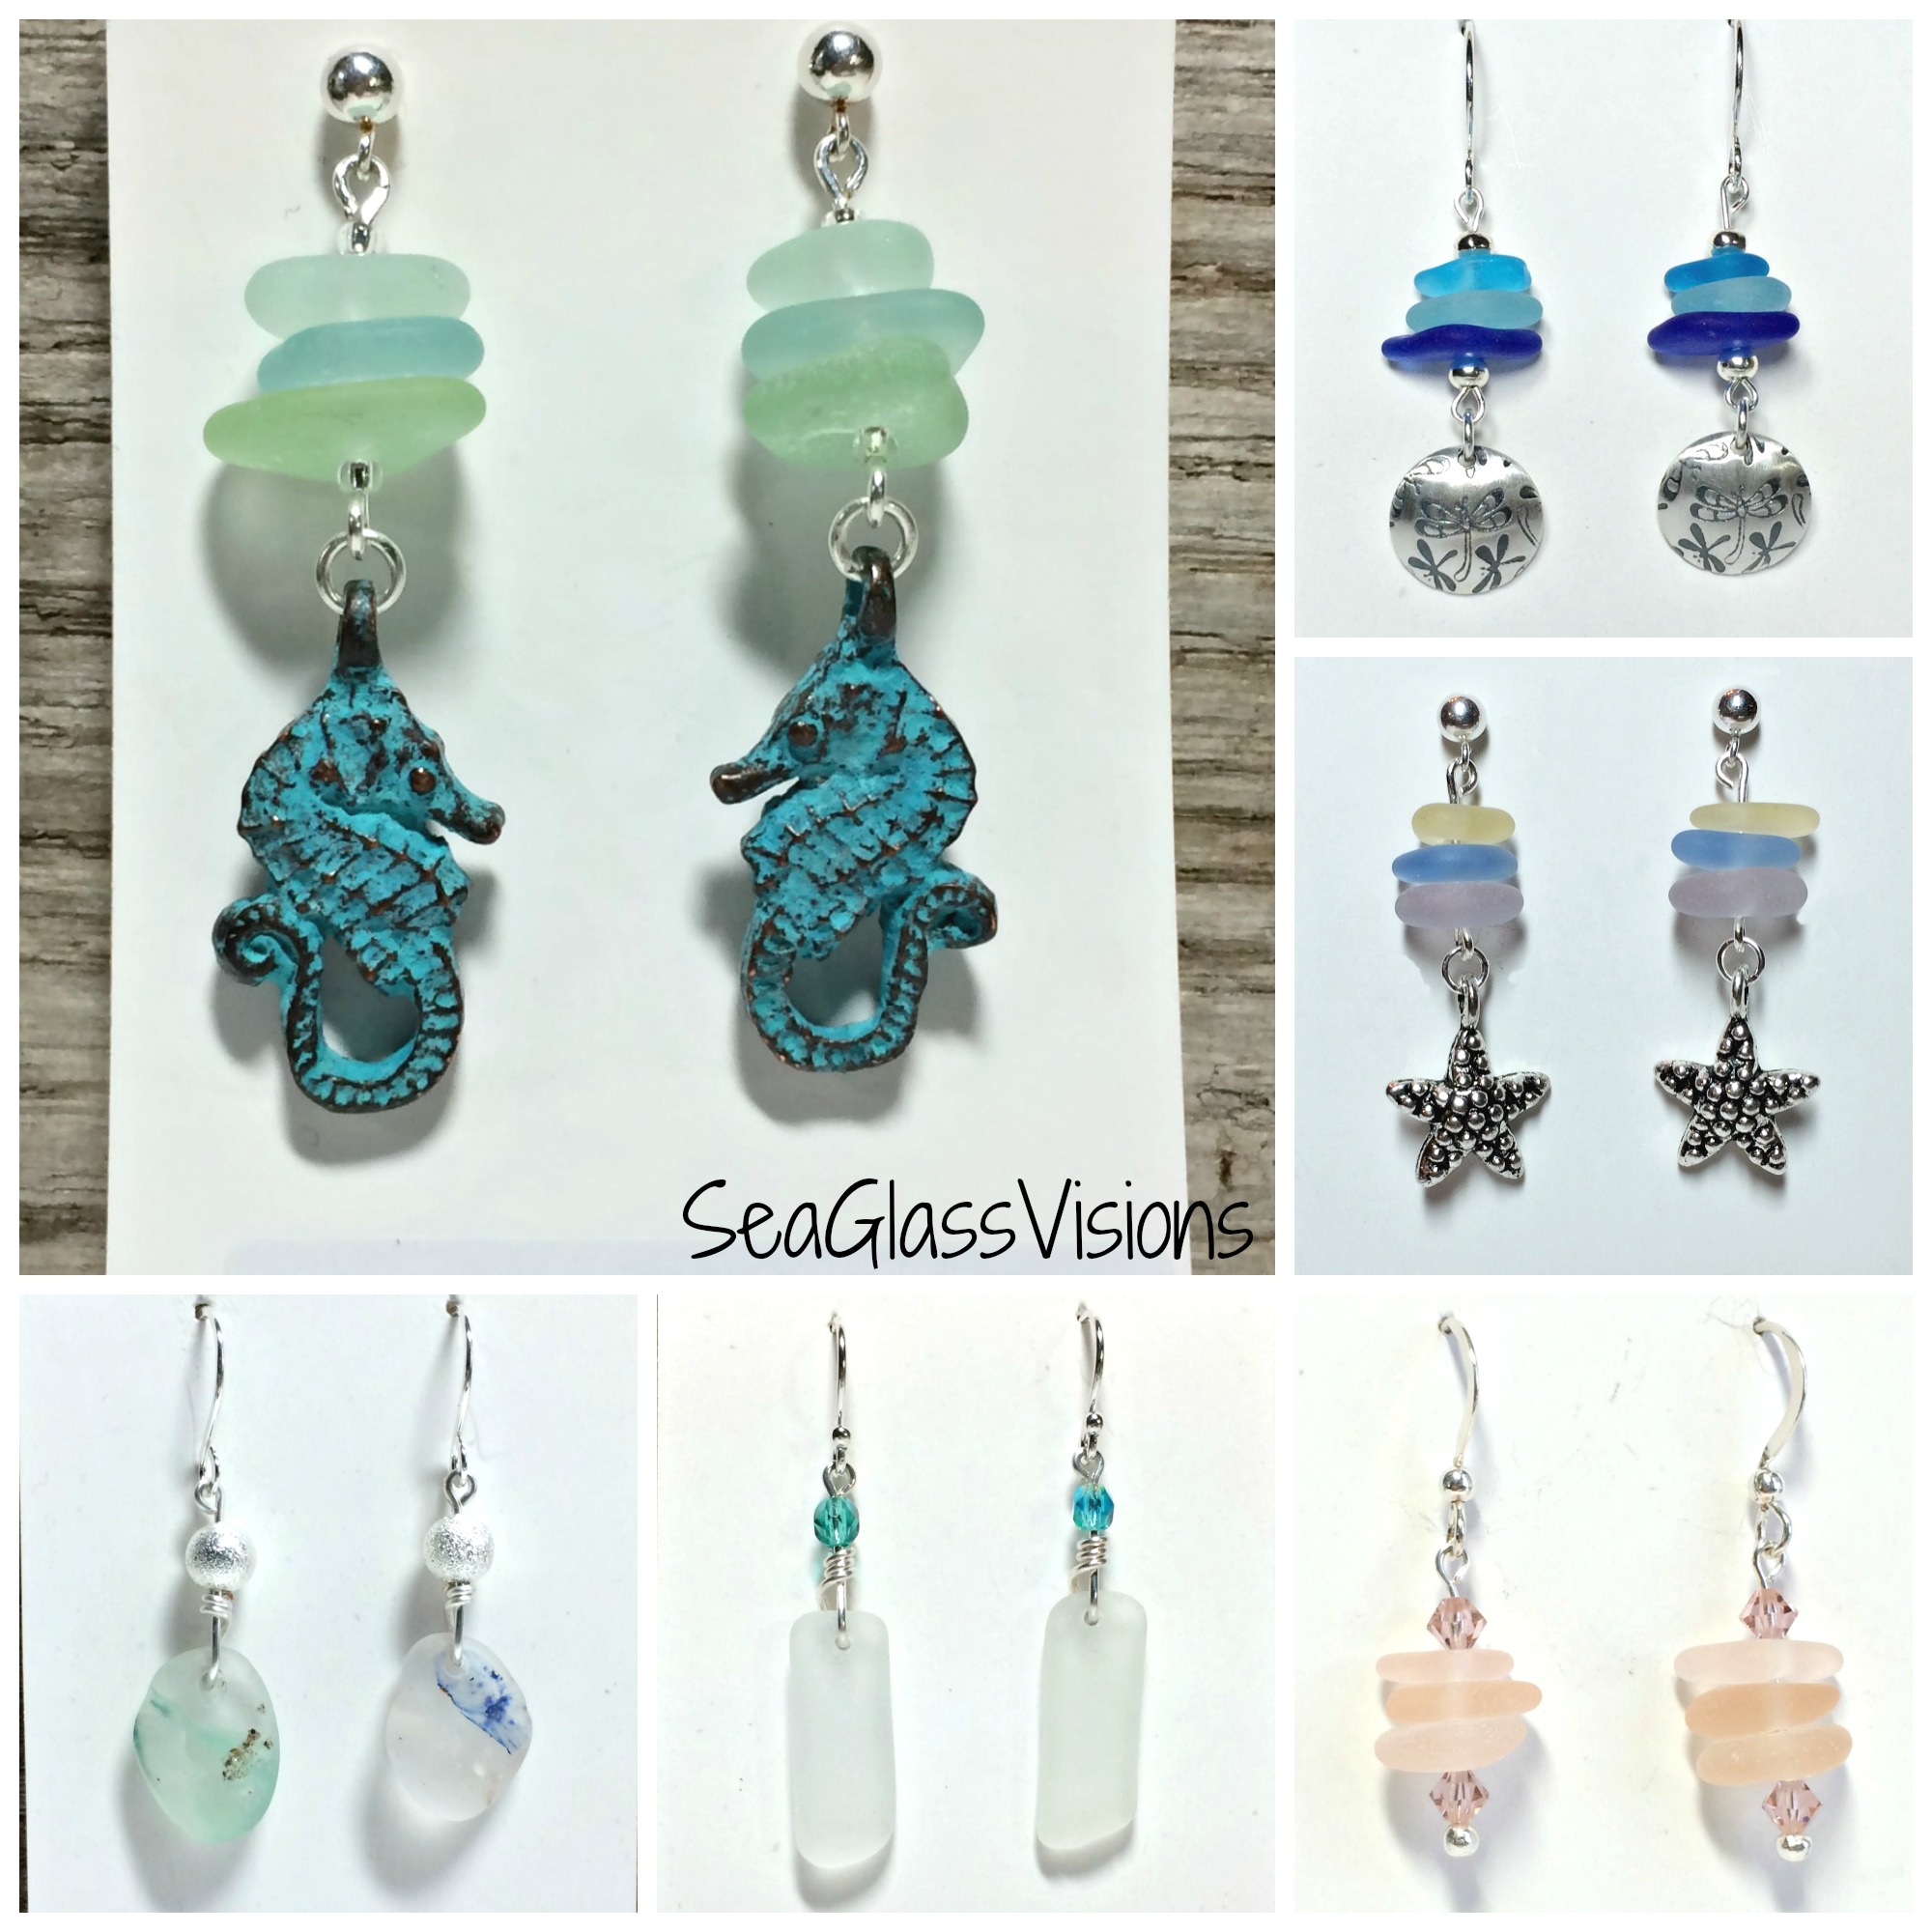 Some of the fabulous sea glass & sterling earrings available in my Etsy shop!